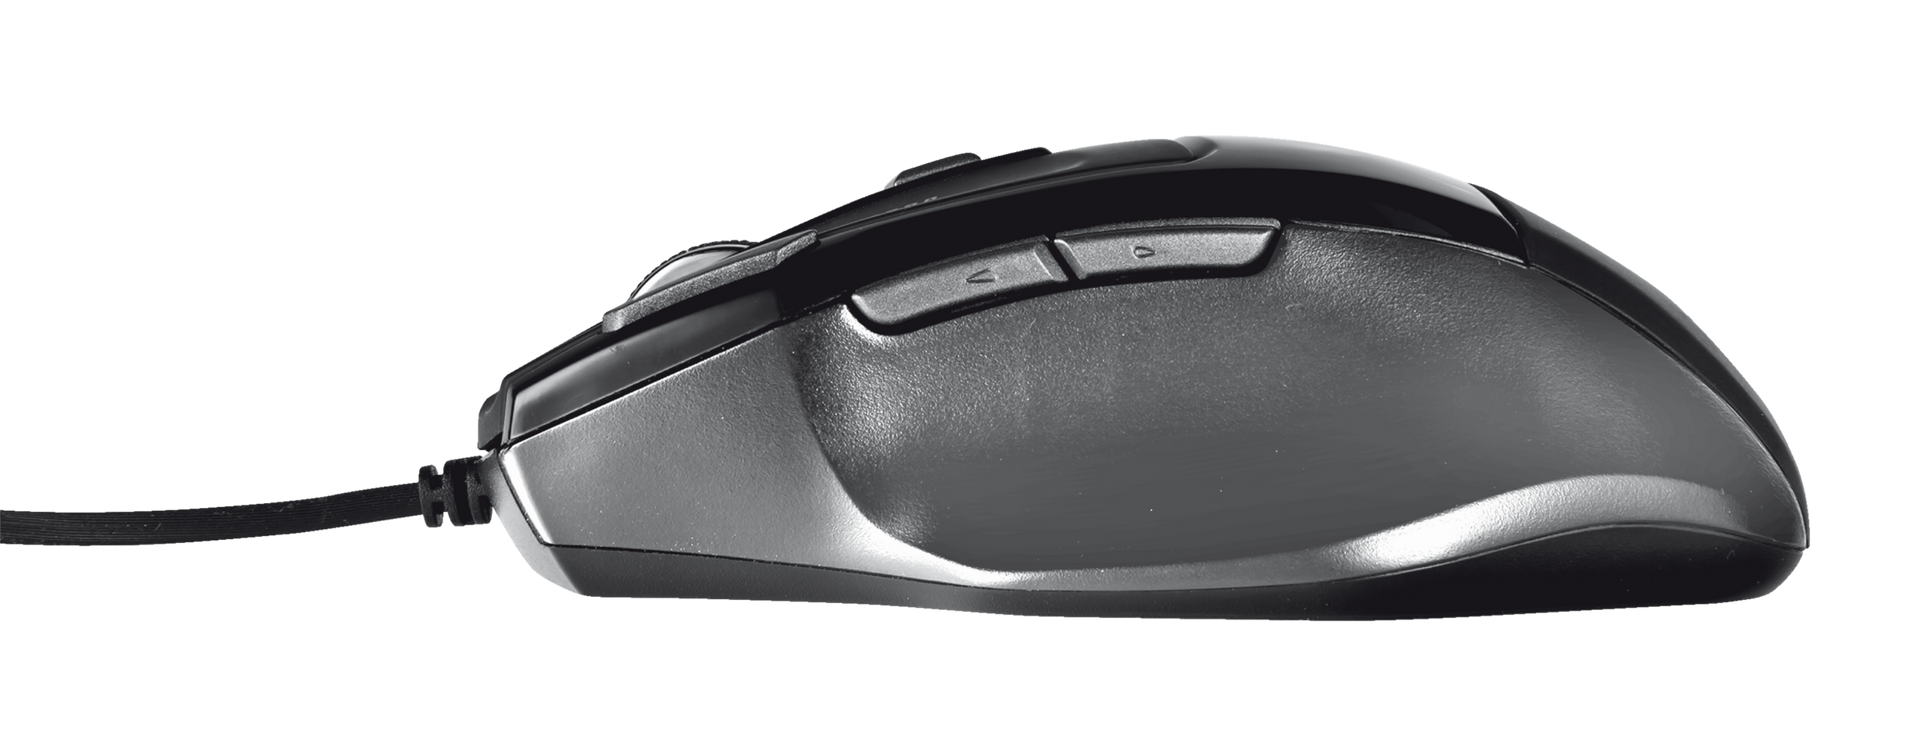 GMS-501 Gaming Mouse-Side